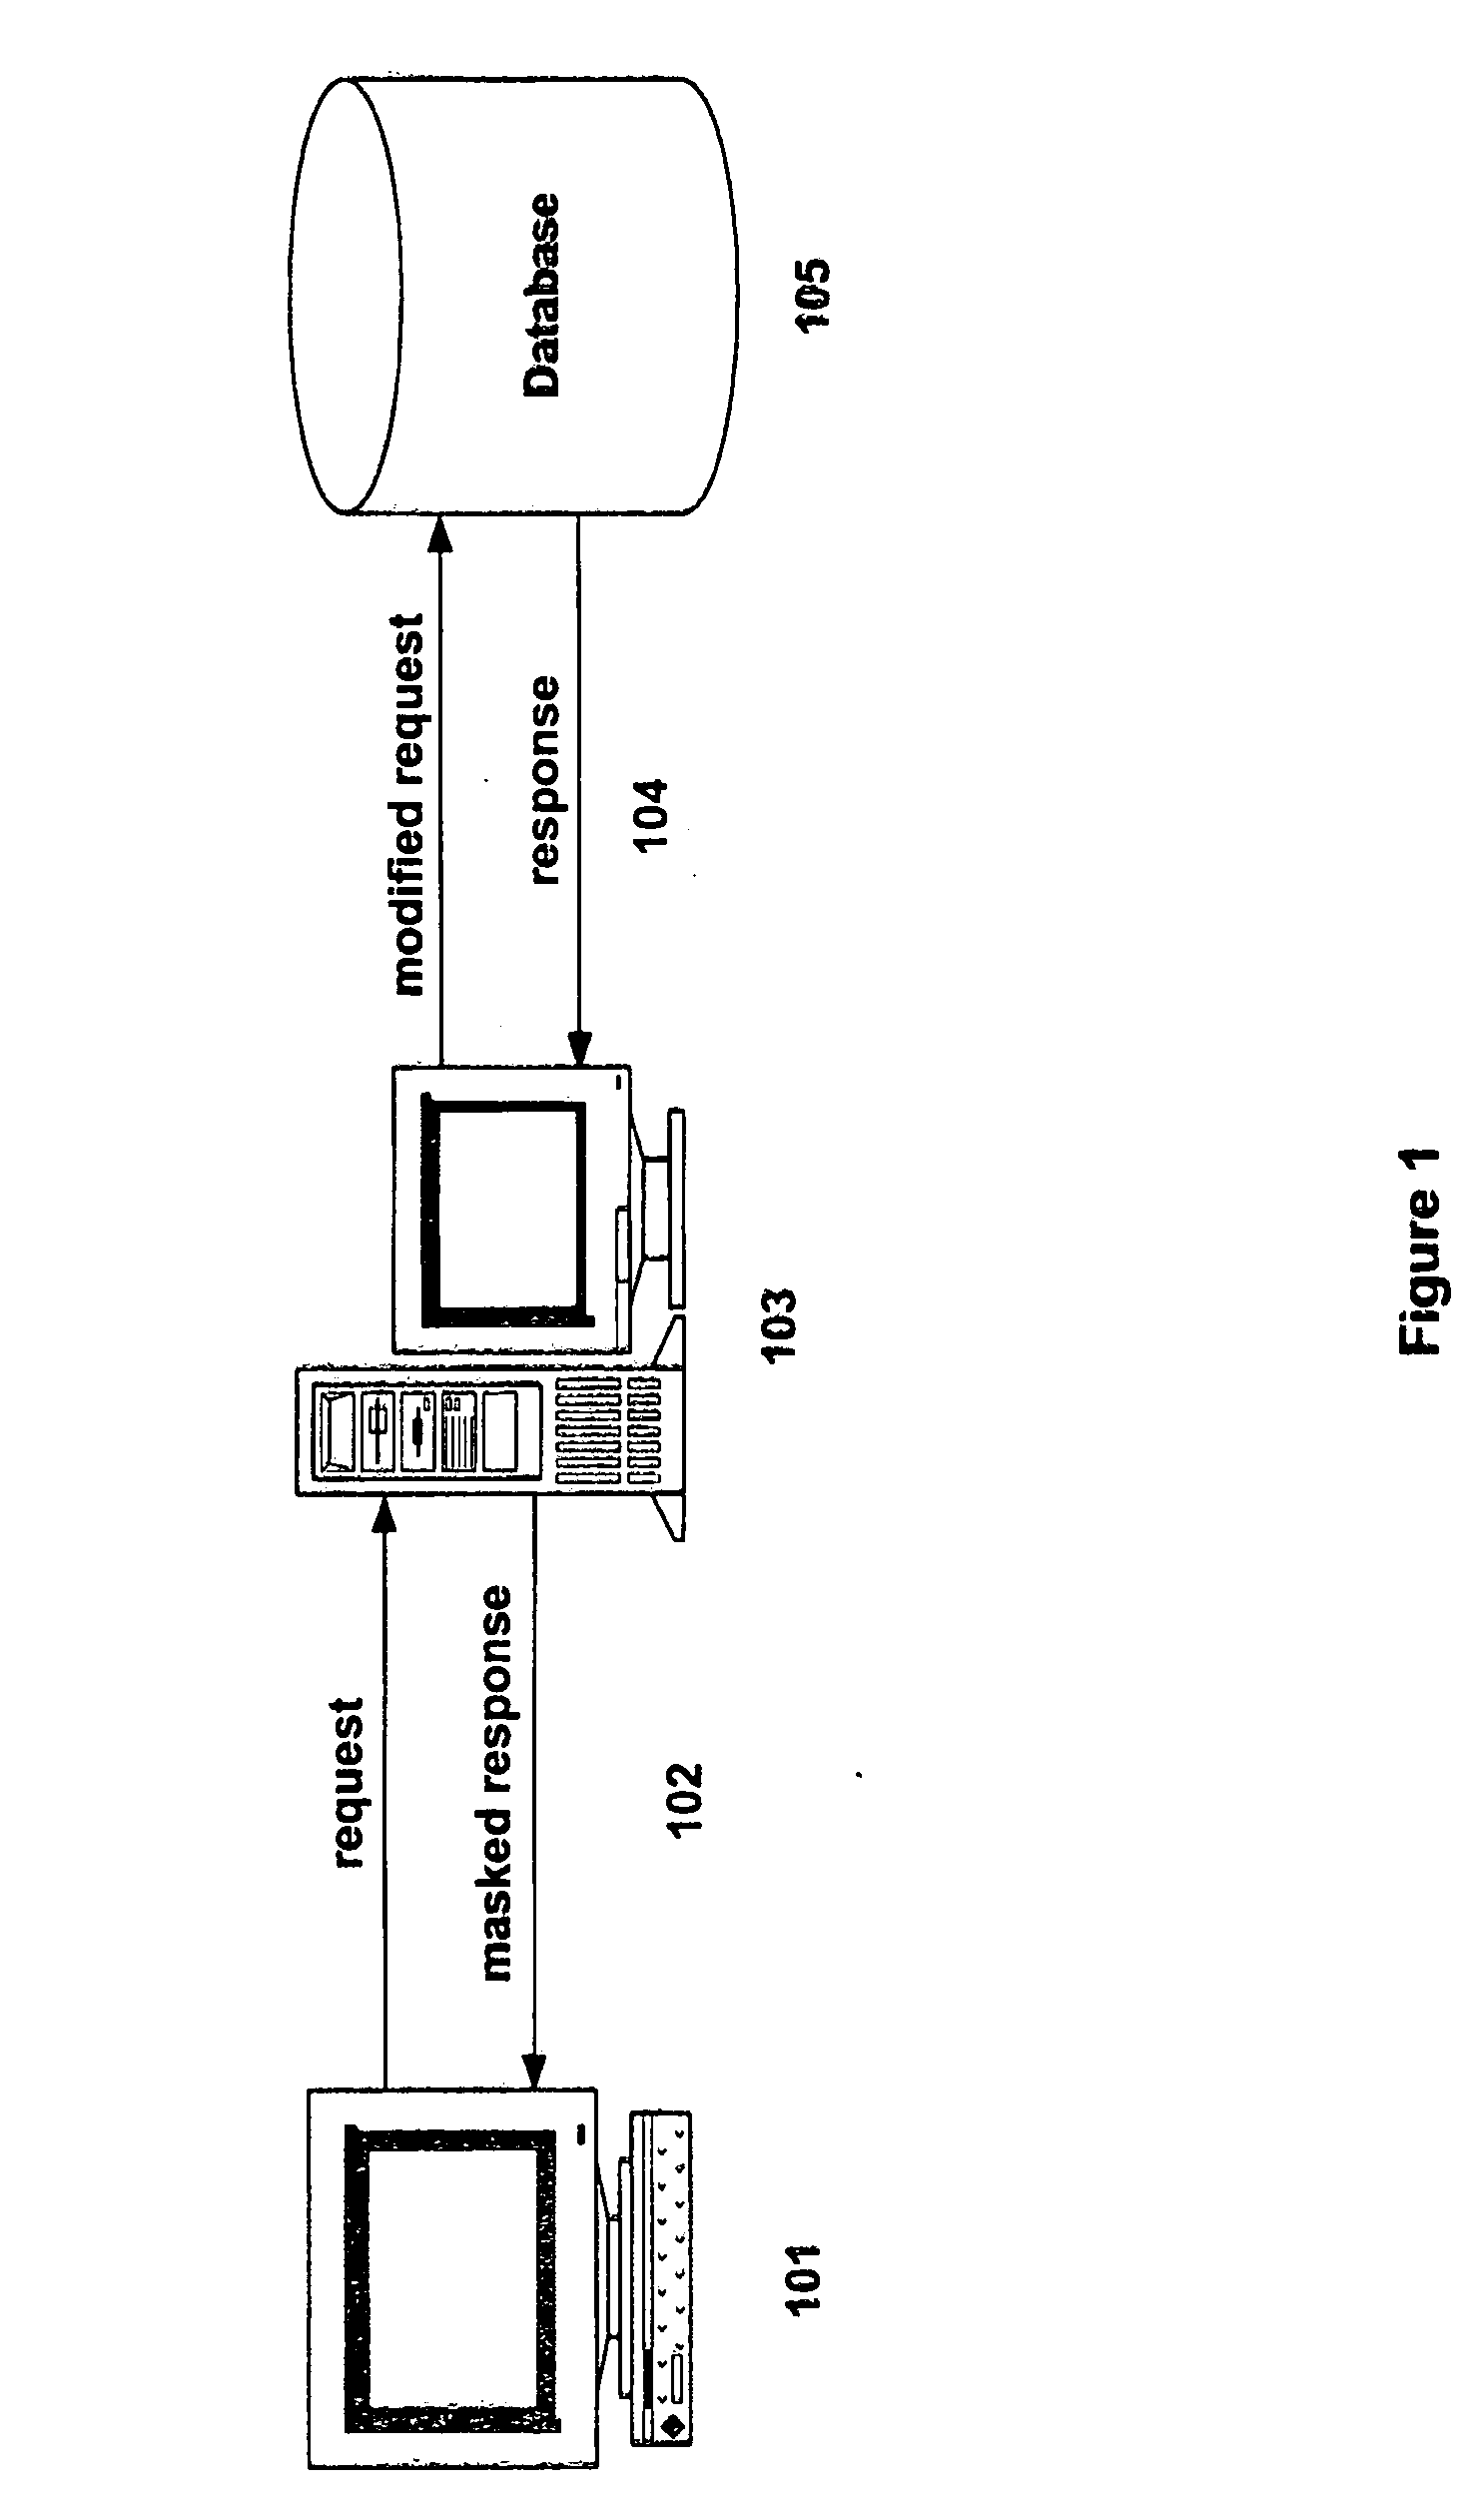 System and method for dynamic data masking